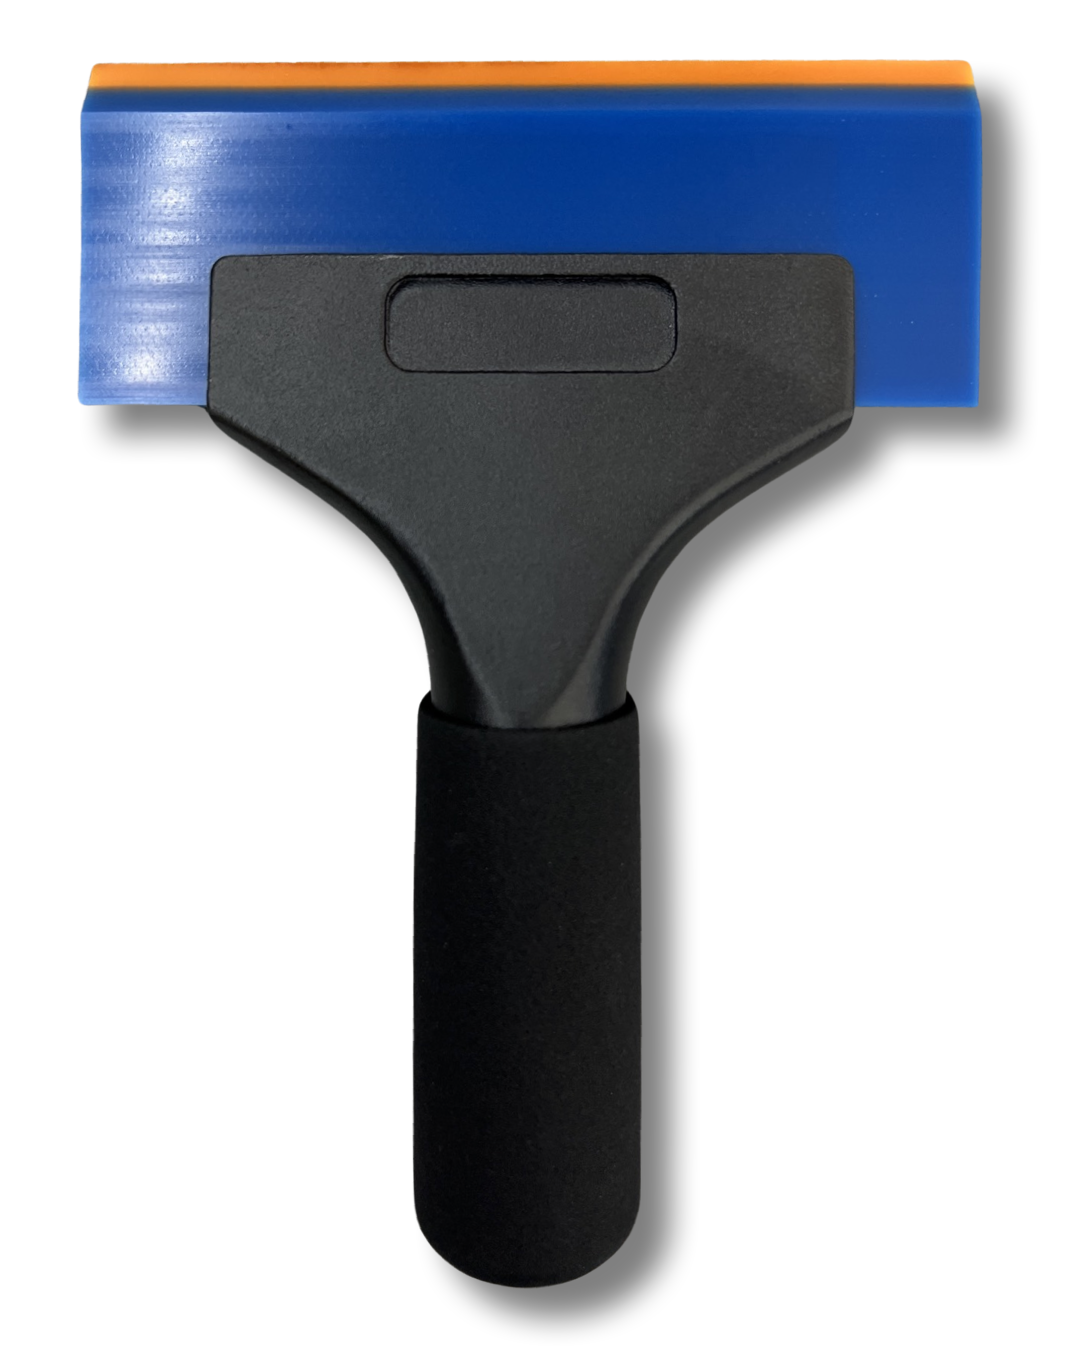 5 Blue Max Angled Squeegee w/ Handle for auto and flat